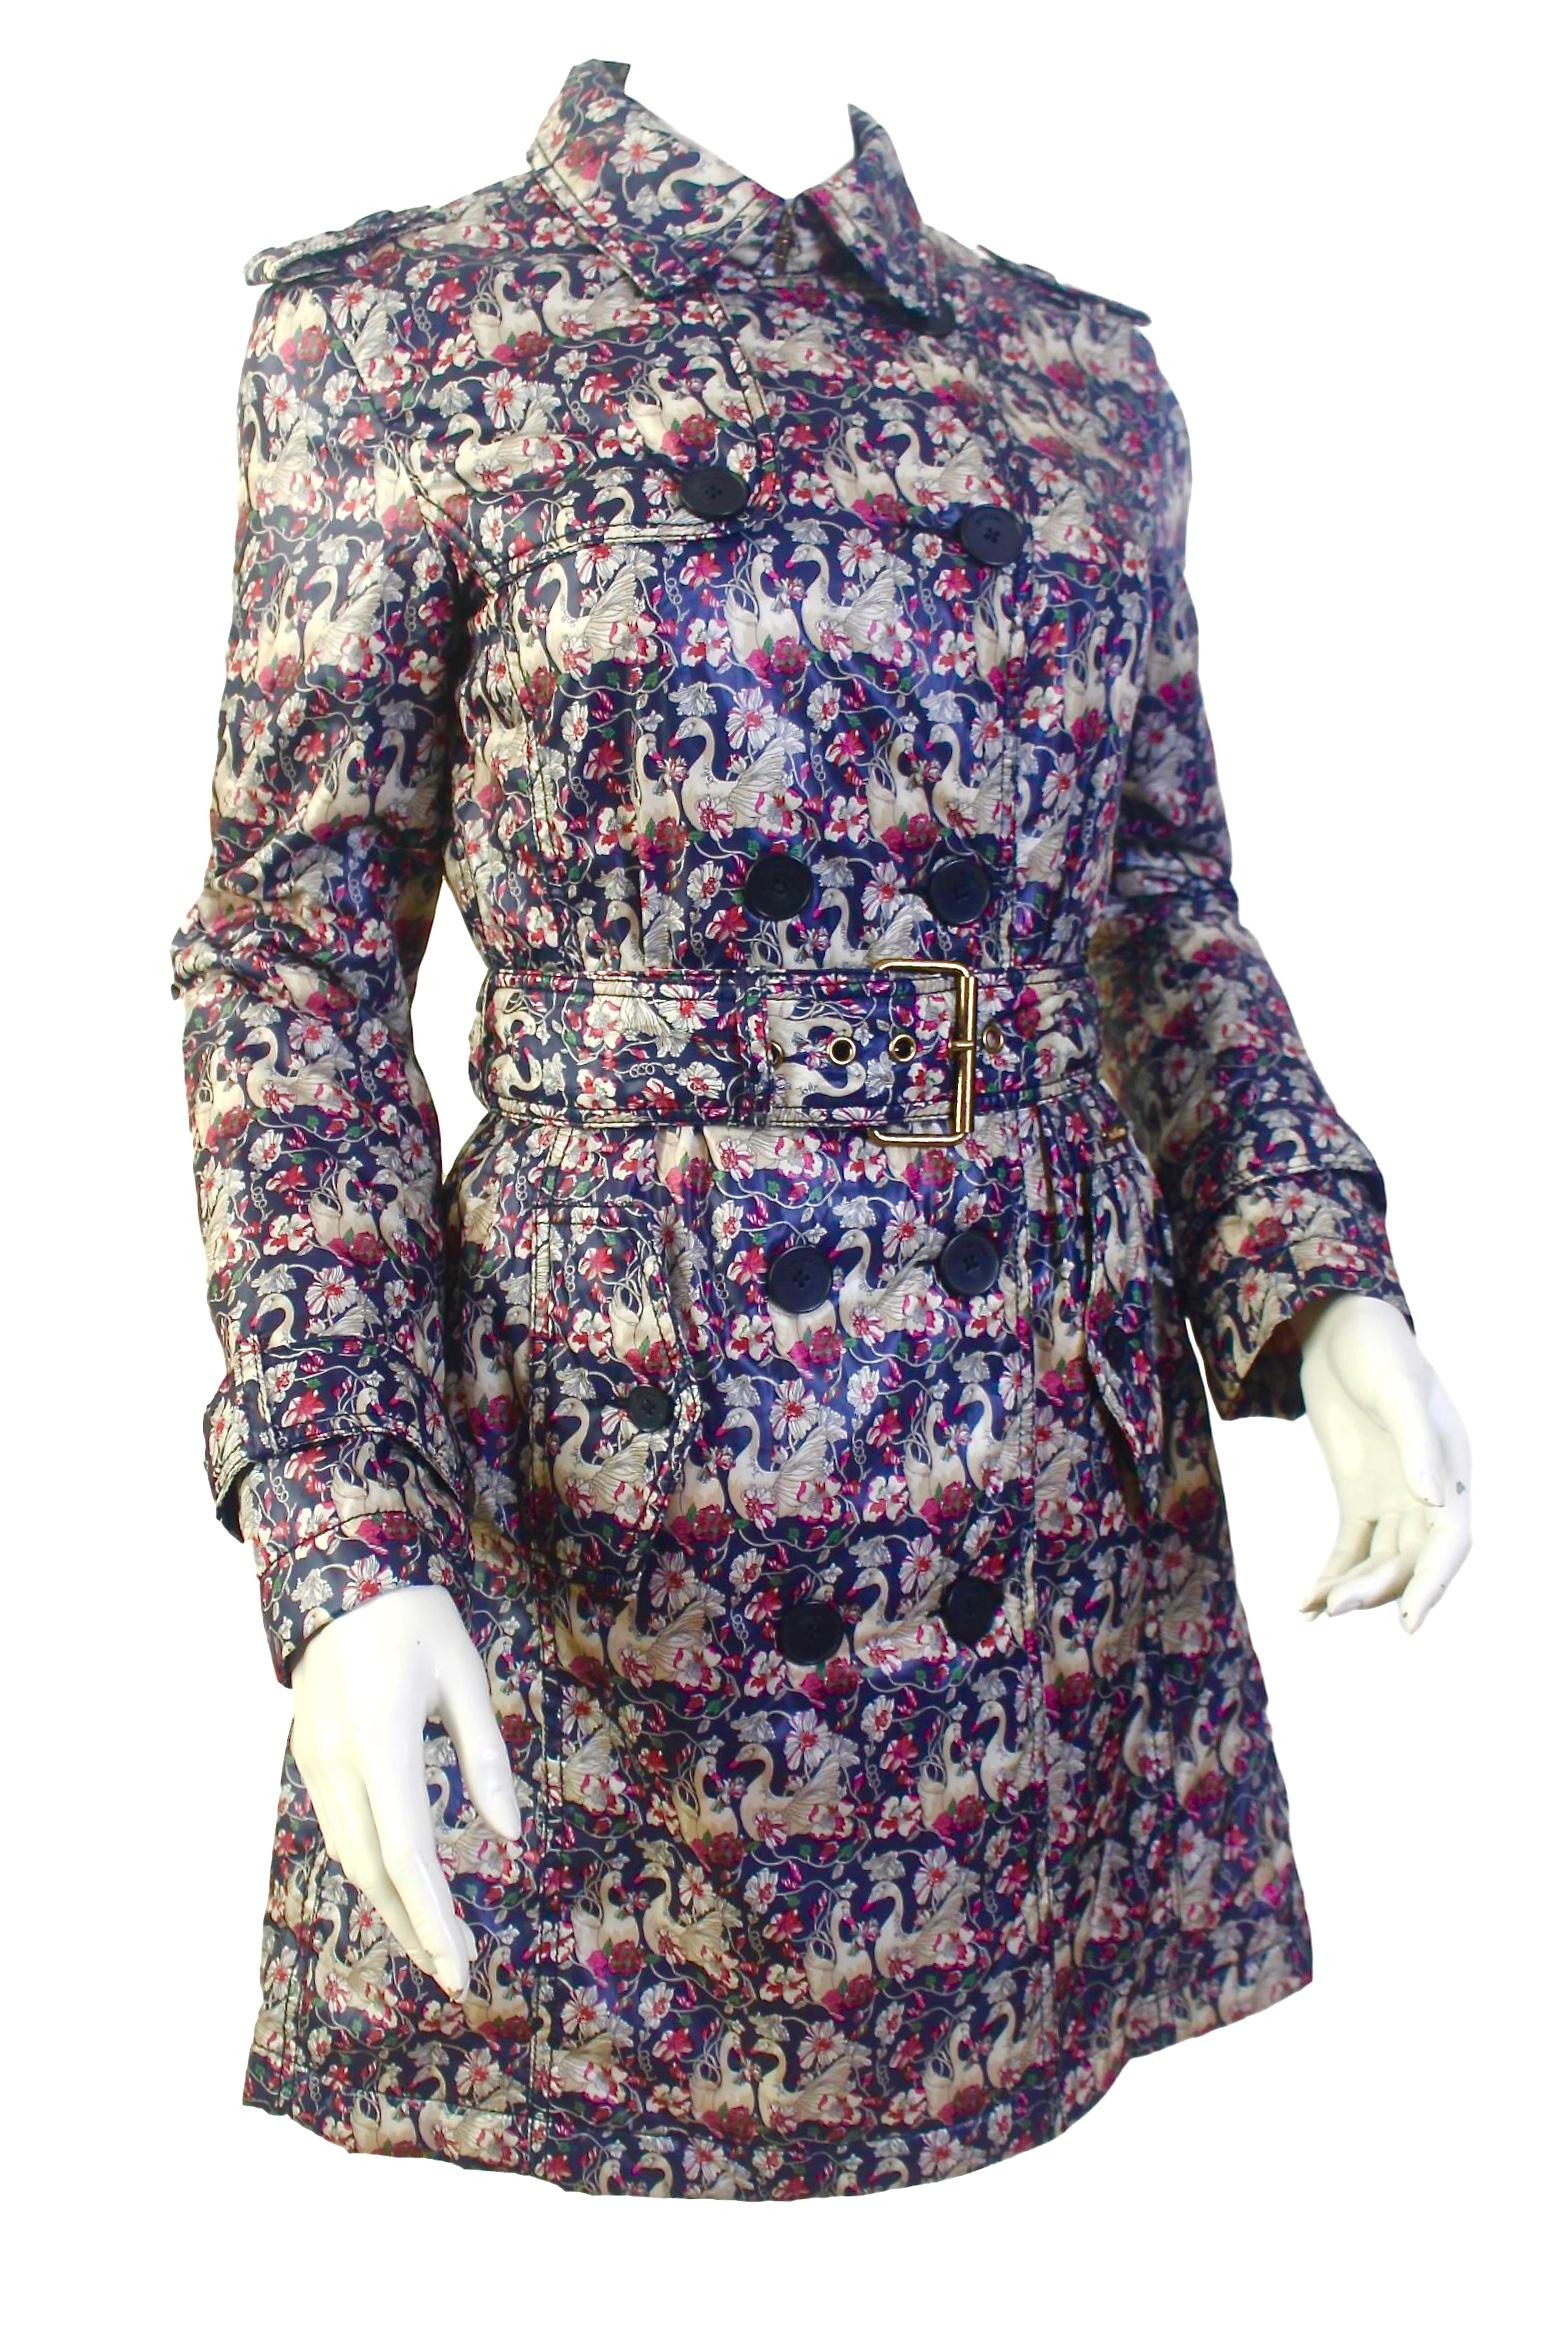 John Galliano Silk Swan Print Padded Coat In Excellent Condition For Sale In Bath, GB